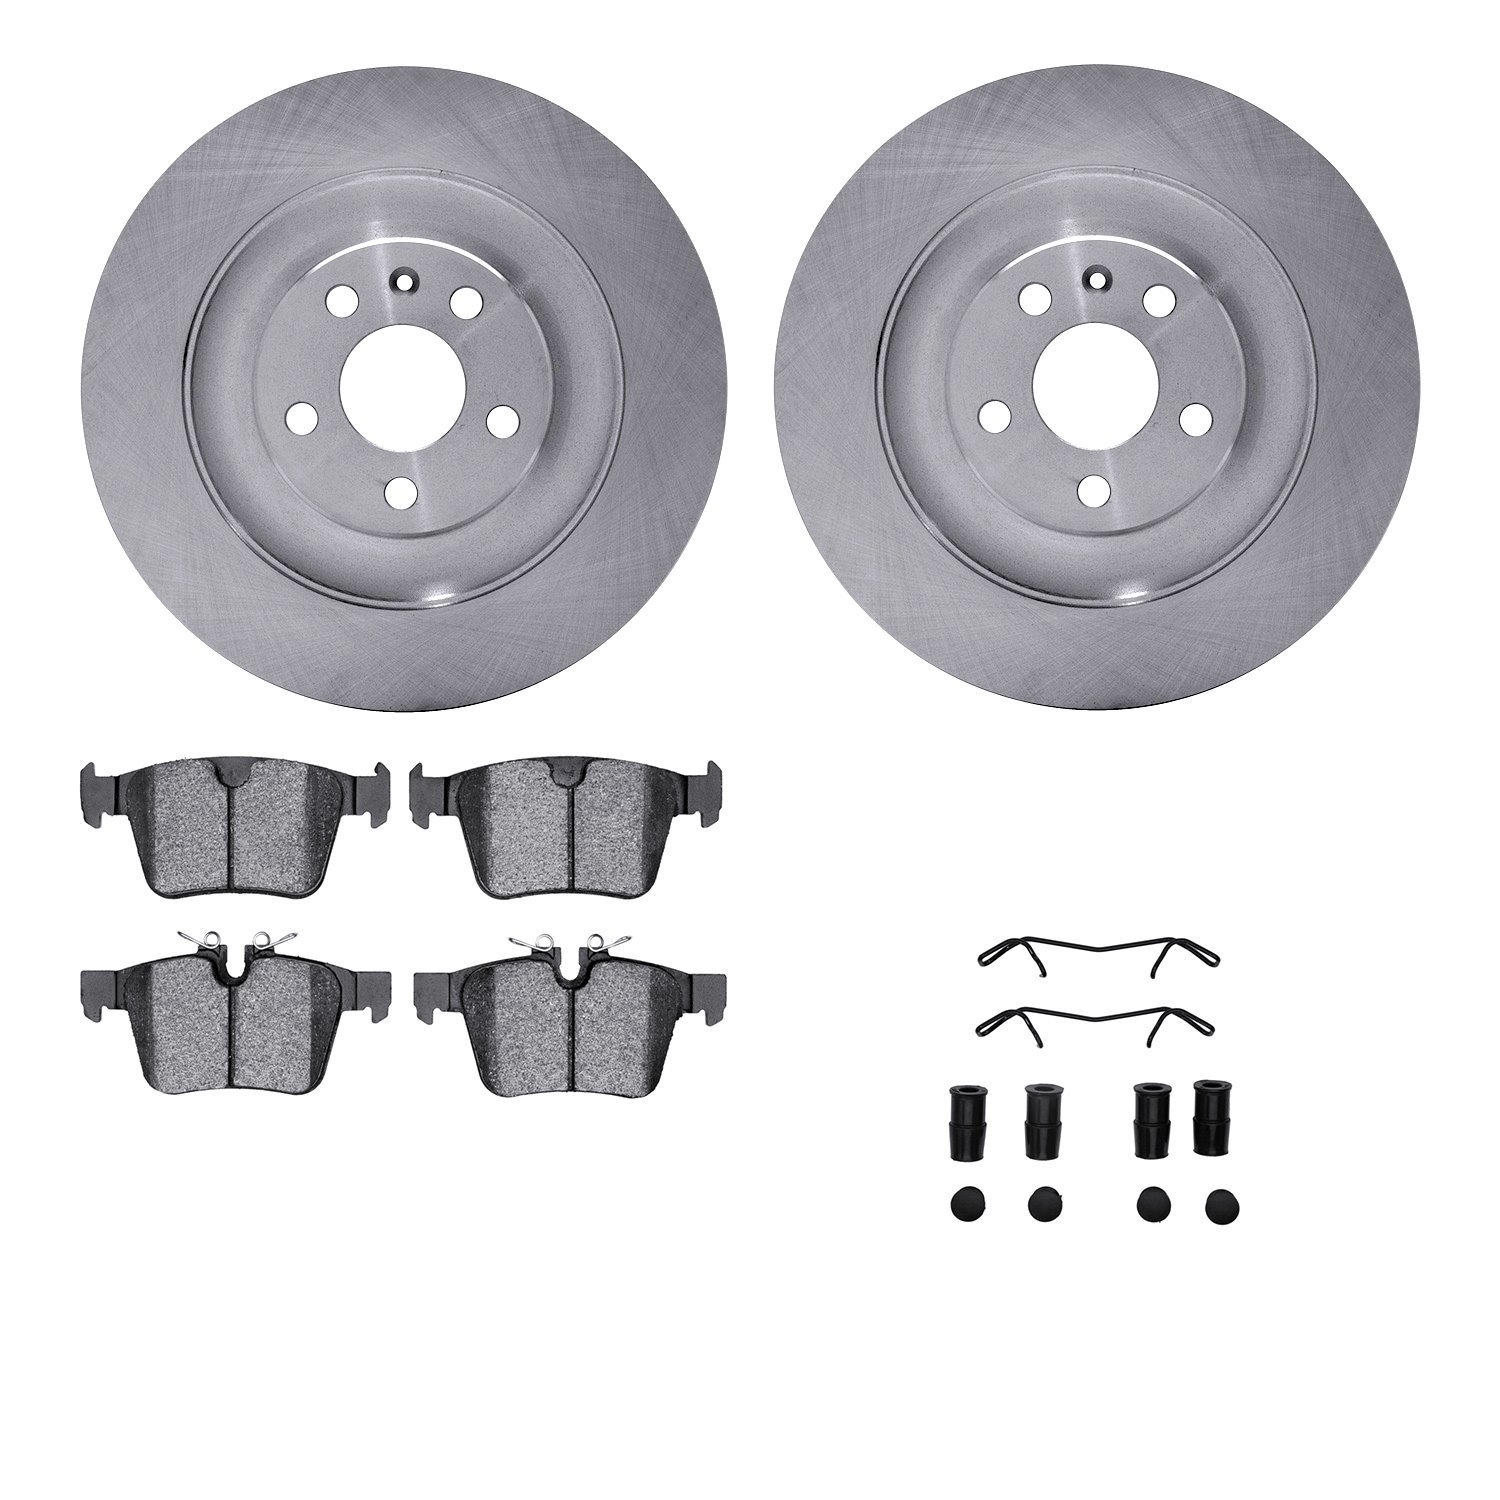 6312-27073 Brake Rotors with 3000-Series Ceramic Brake Pads Kit with Hardware, Fits Select Multiple Makes/Models, Position: Rear